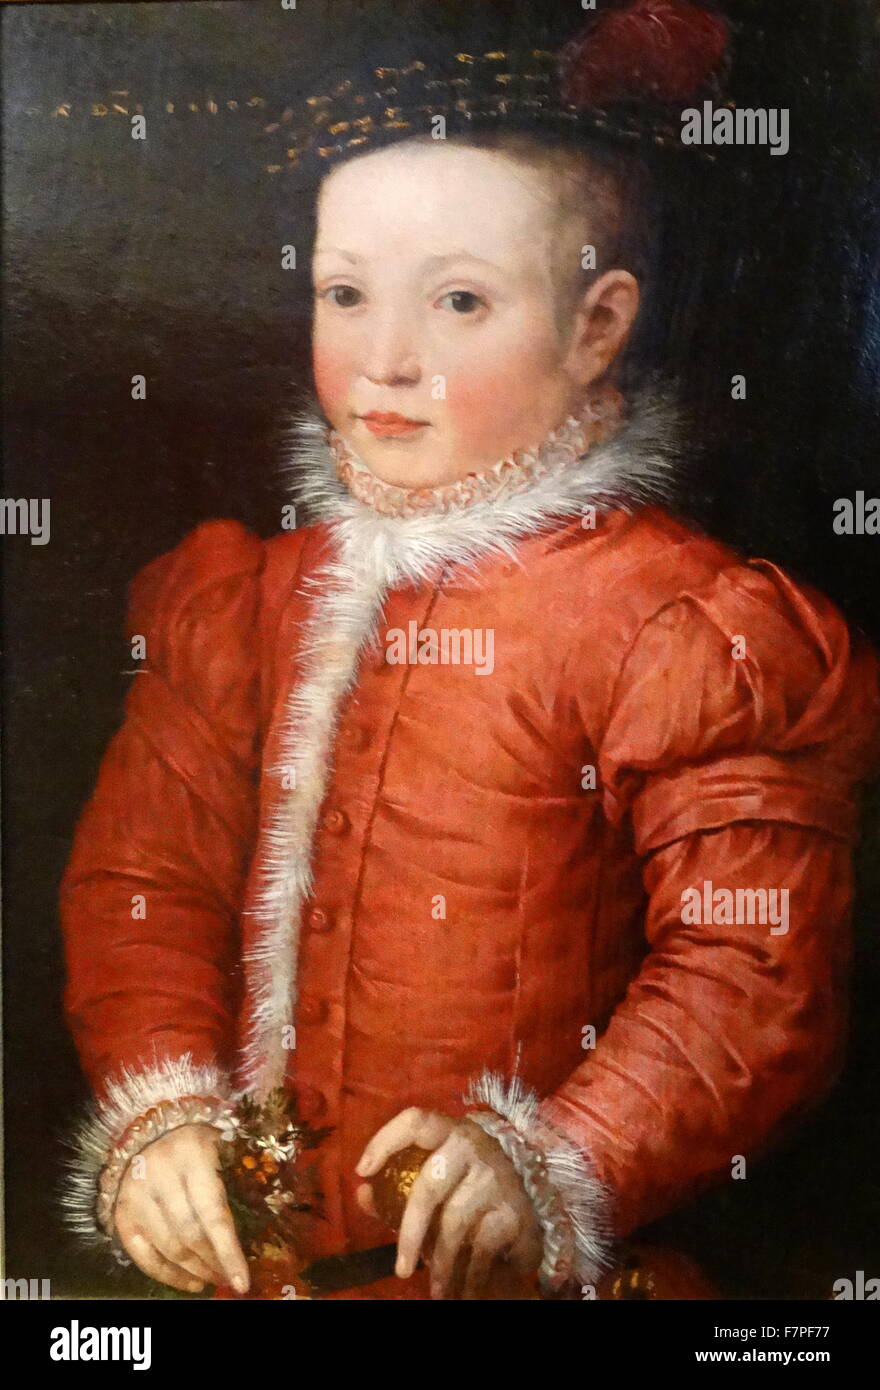 Painting titled 'A Boy with a Nosegay' by the Flemish School. Dated 16th Century Stock Photo